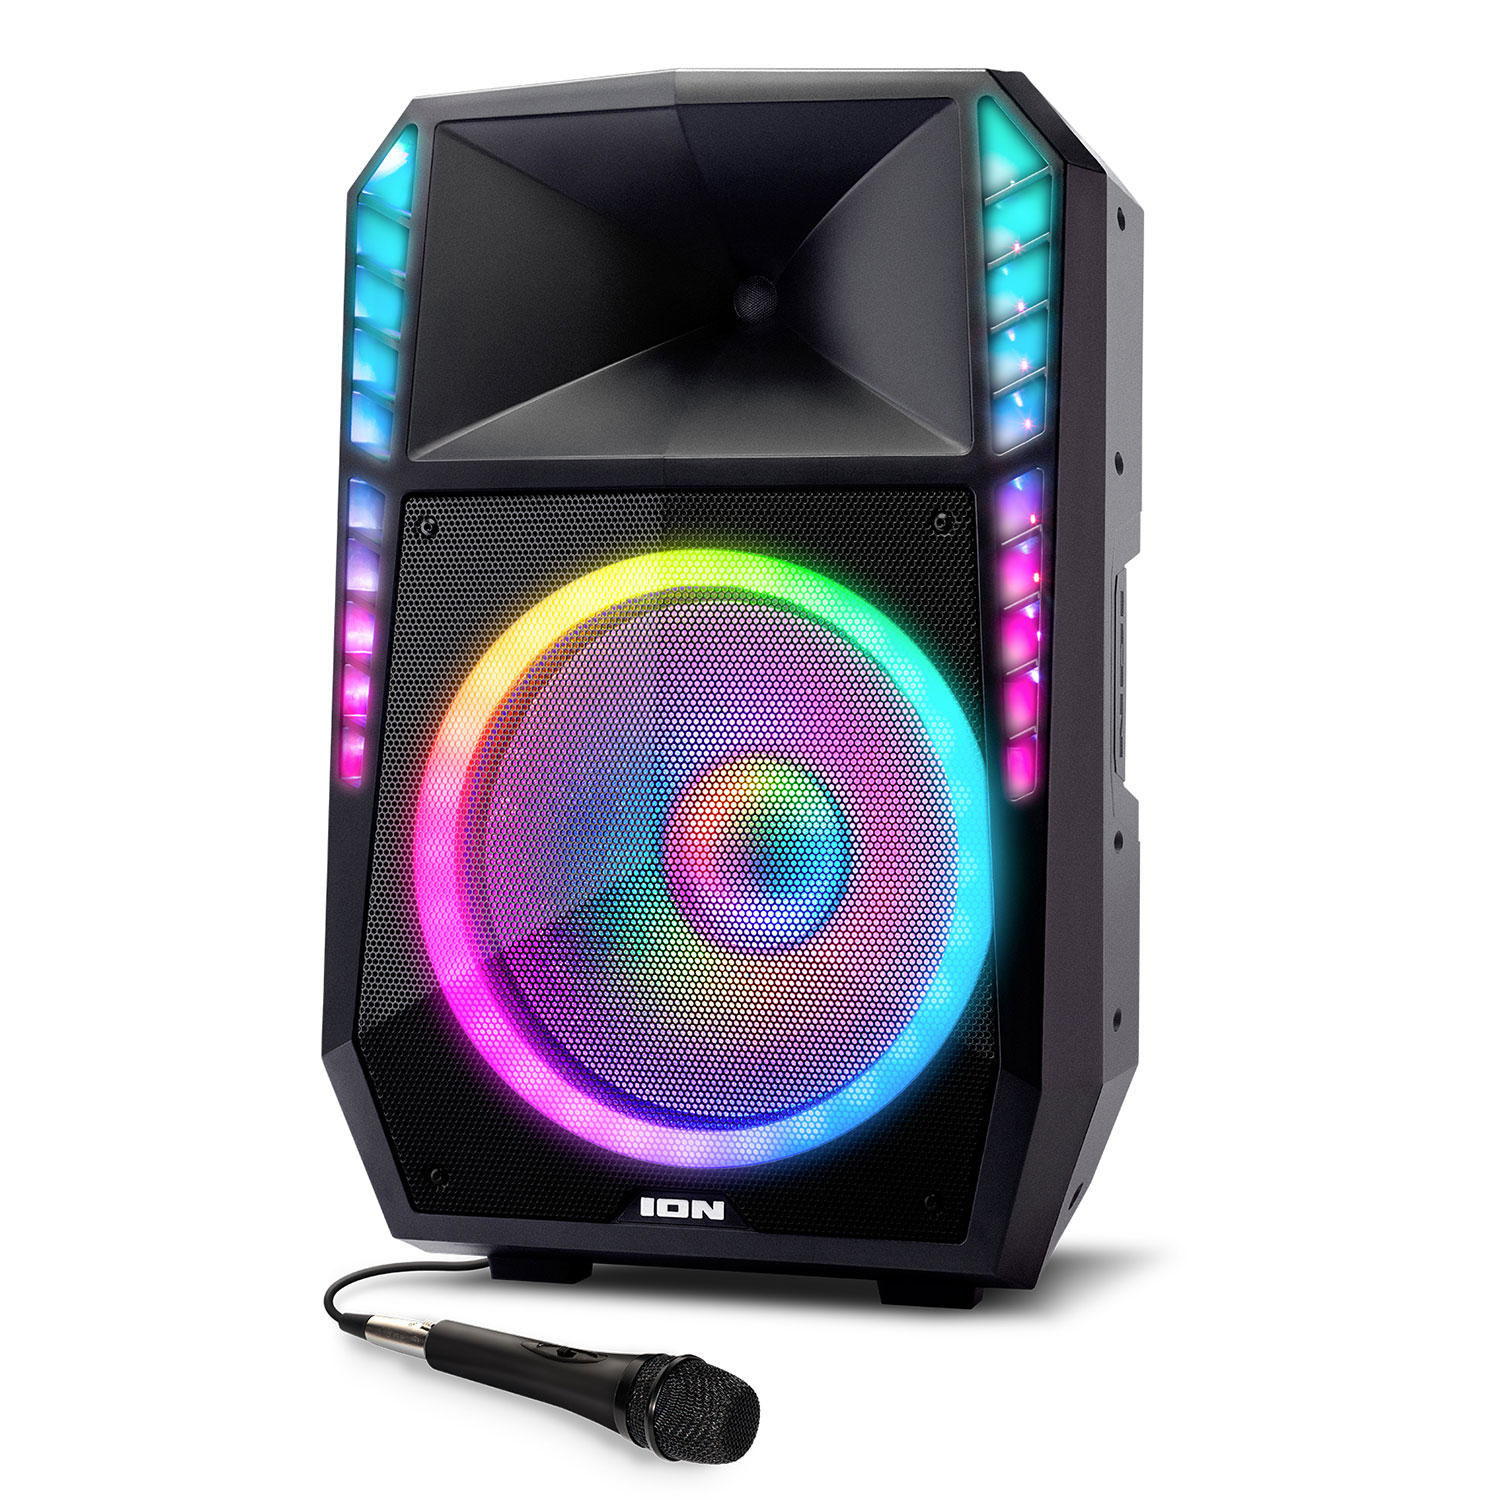 A big speaker with glowing LED lights throughout and a microphone